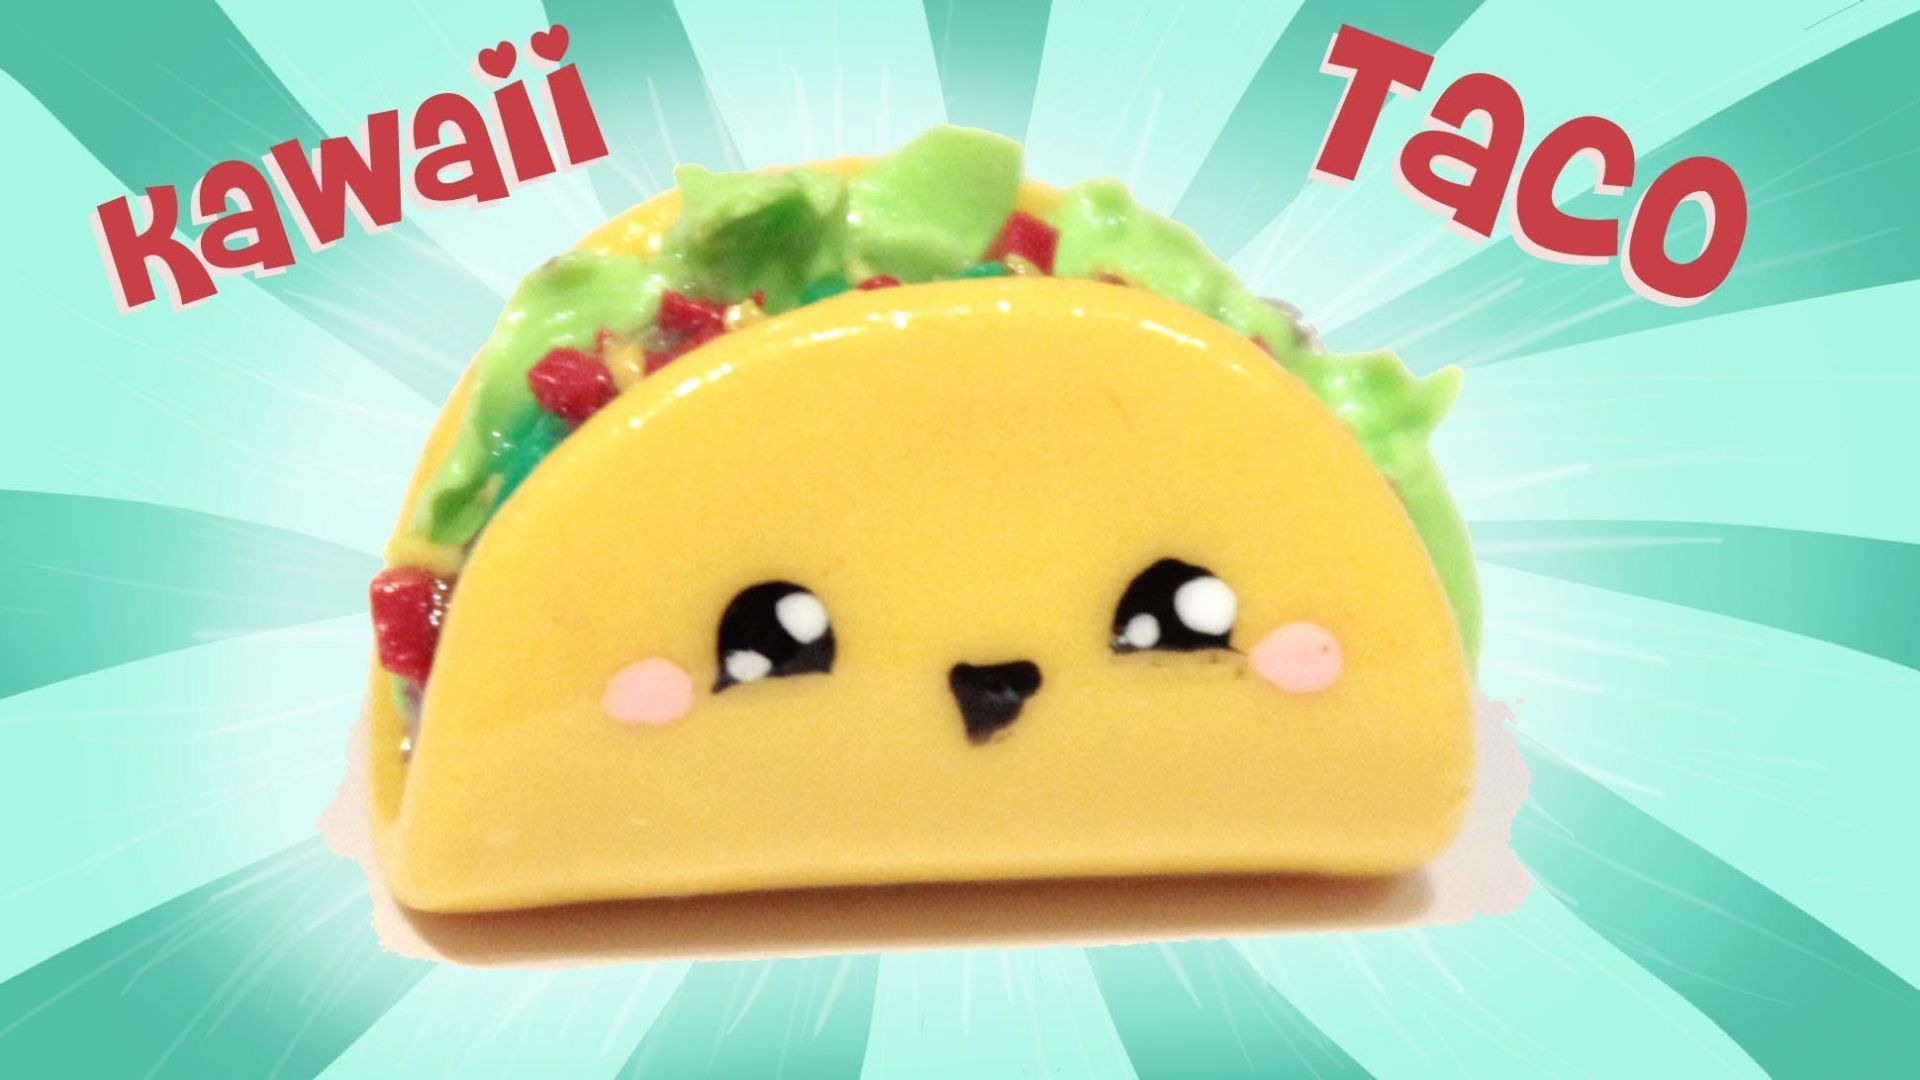 Free download Cute Taco Maxresdefaultjpg [1940x1091] for your Desktop, Mobile & Tablet. Explore Cute Taco Wallpaper. Cute Taco Wallpaper, Taco Wallpaper, Taco Cat Wallpaper